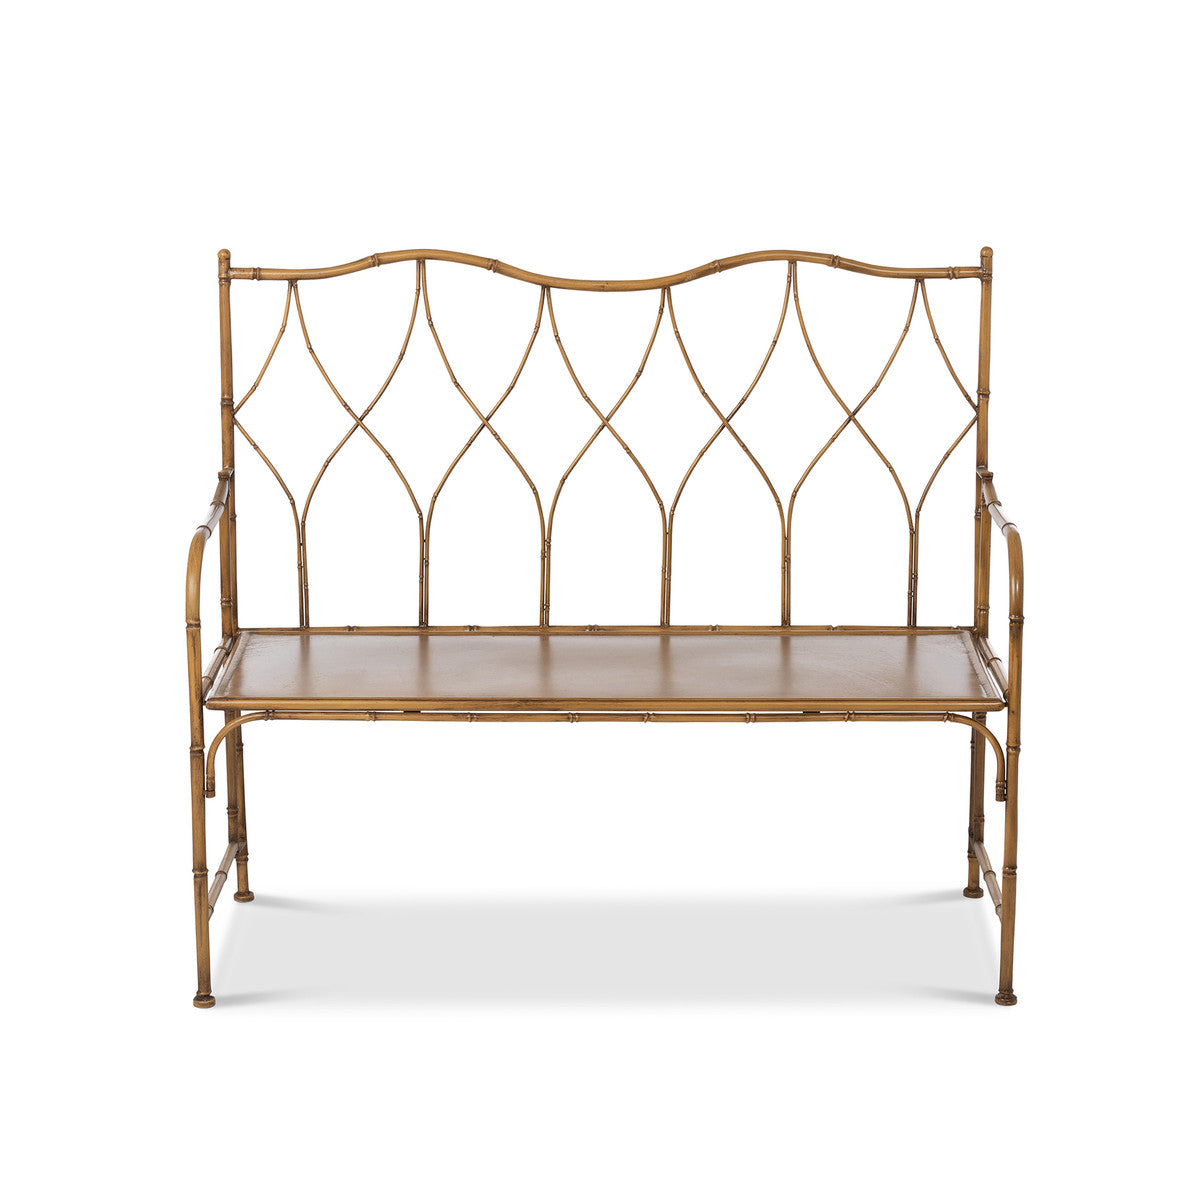 Roanoke Metal Porch Bench - Online Only